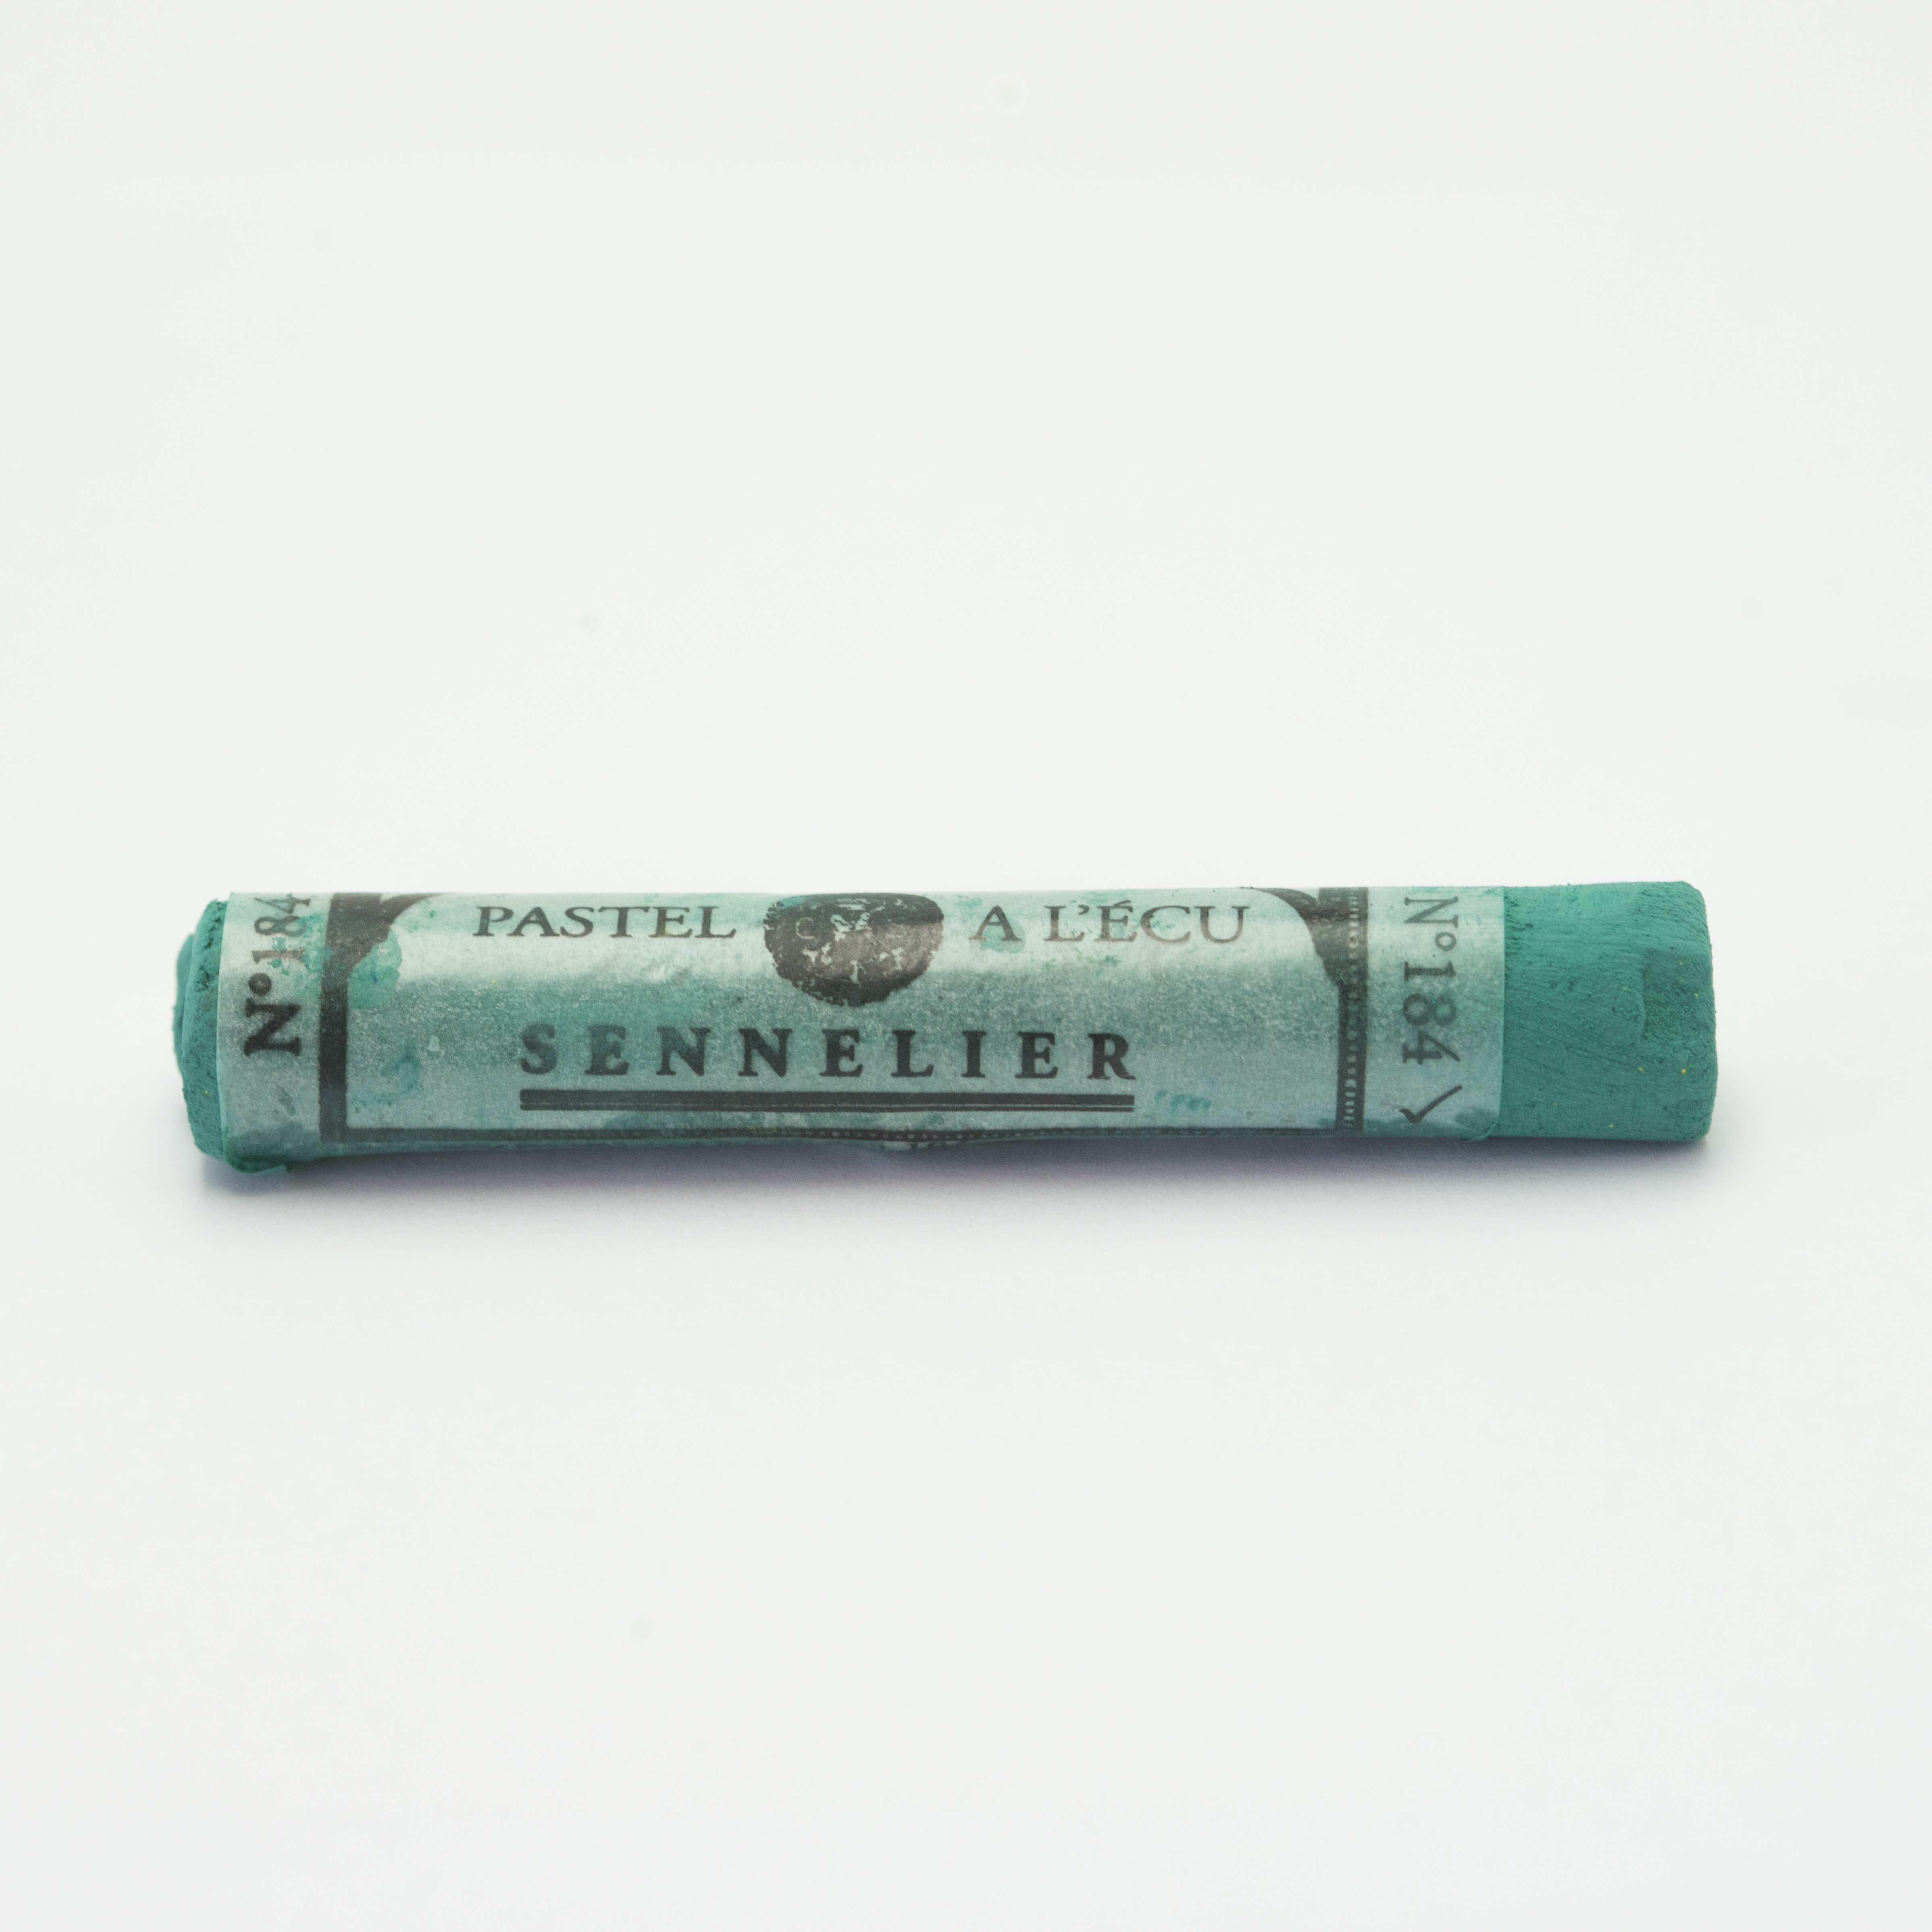 Sennelier Extra Soft Pastels - English Green 184